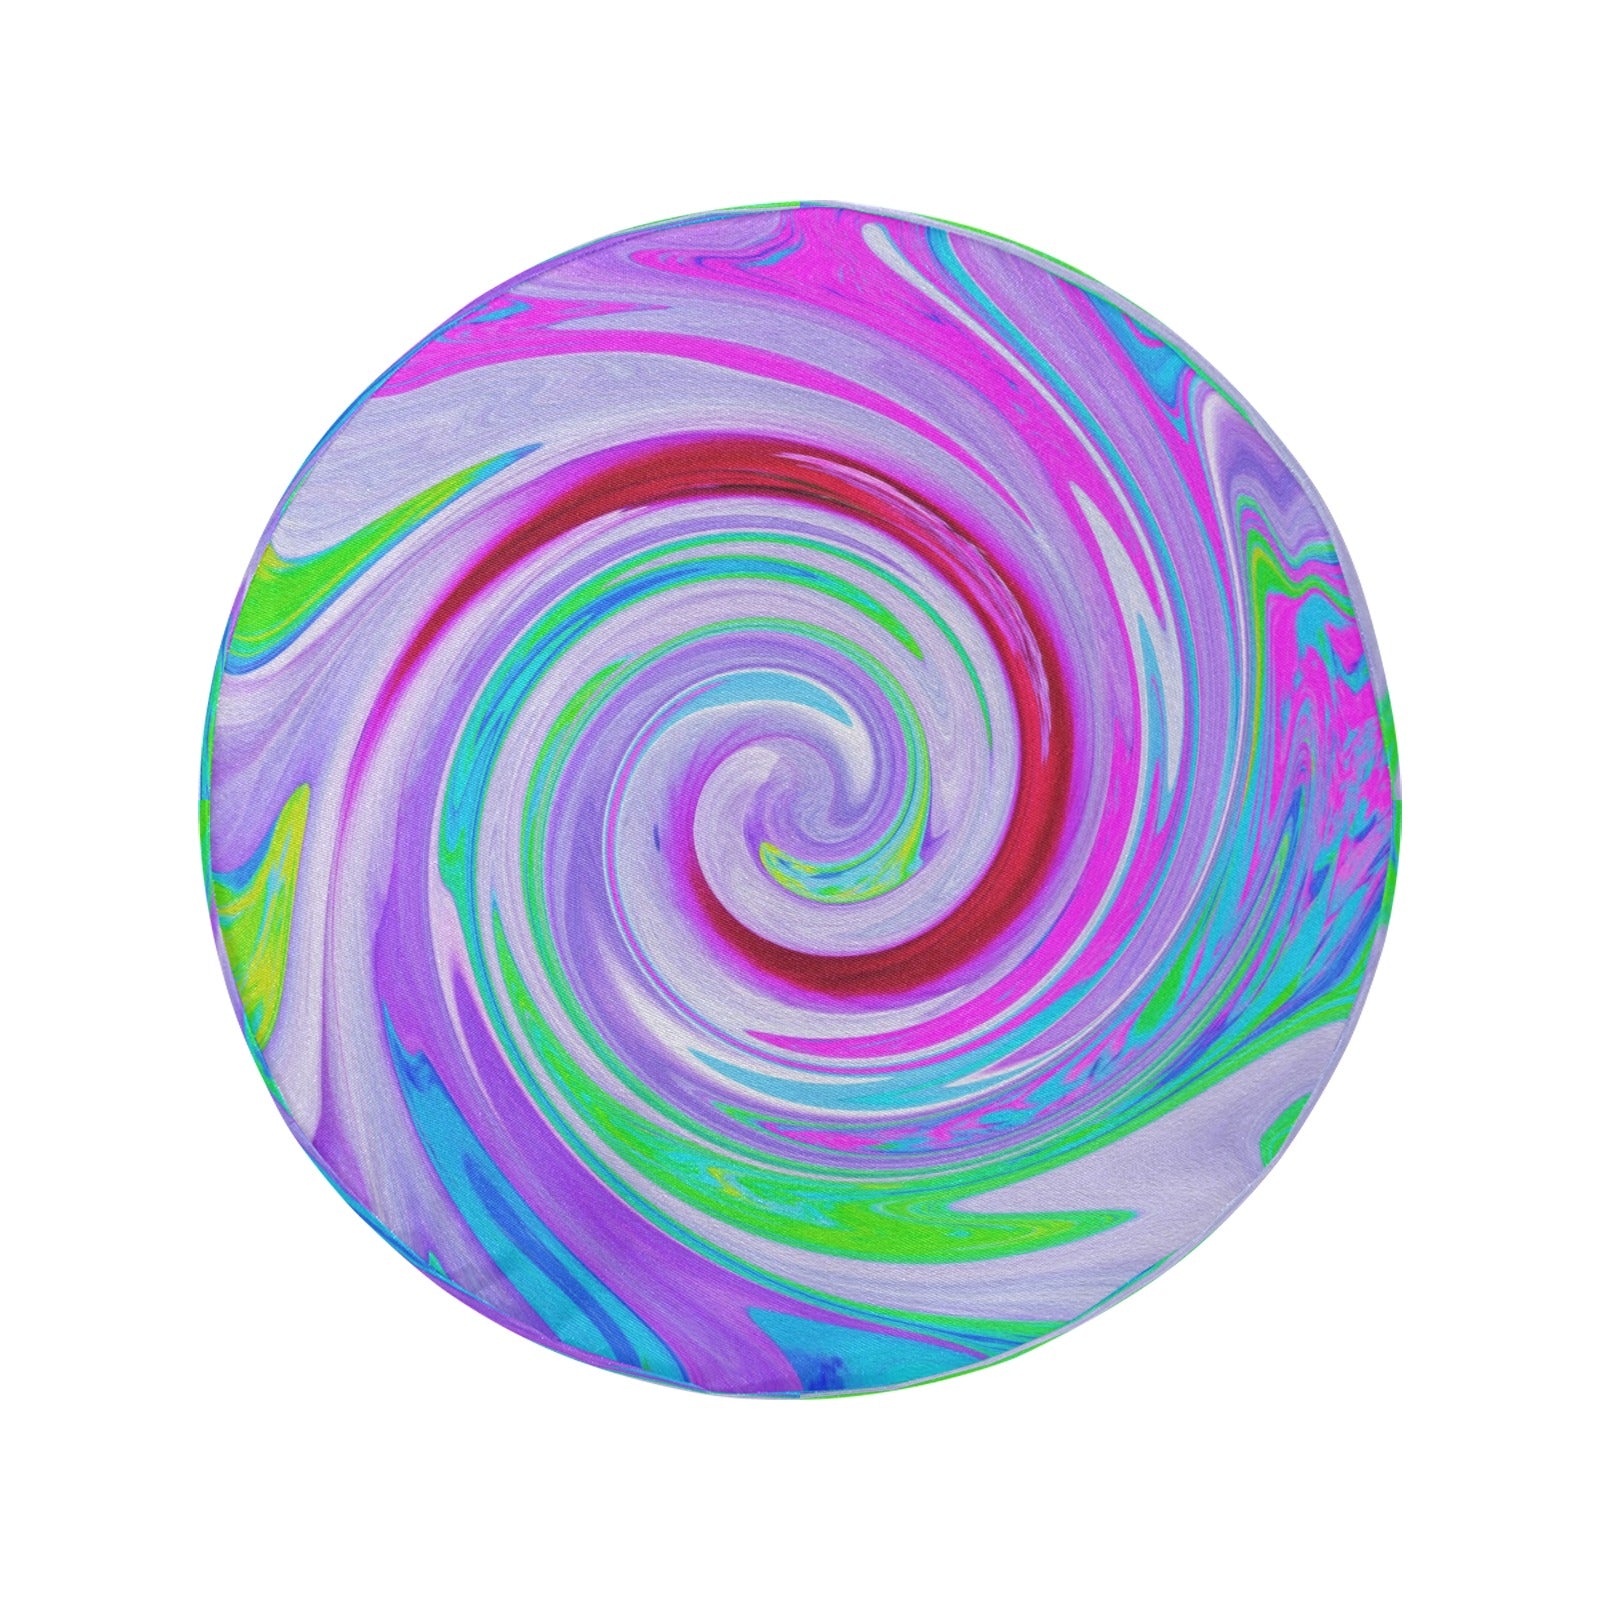 Spare Tire Covers - Groovy Abstract Red Swirl on Purple and Pink - Large